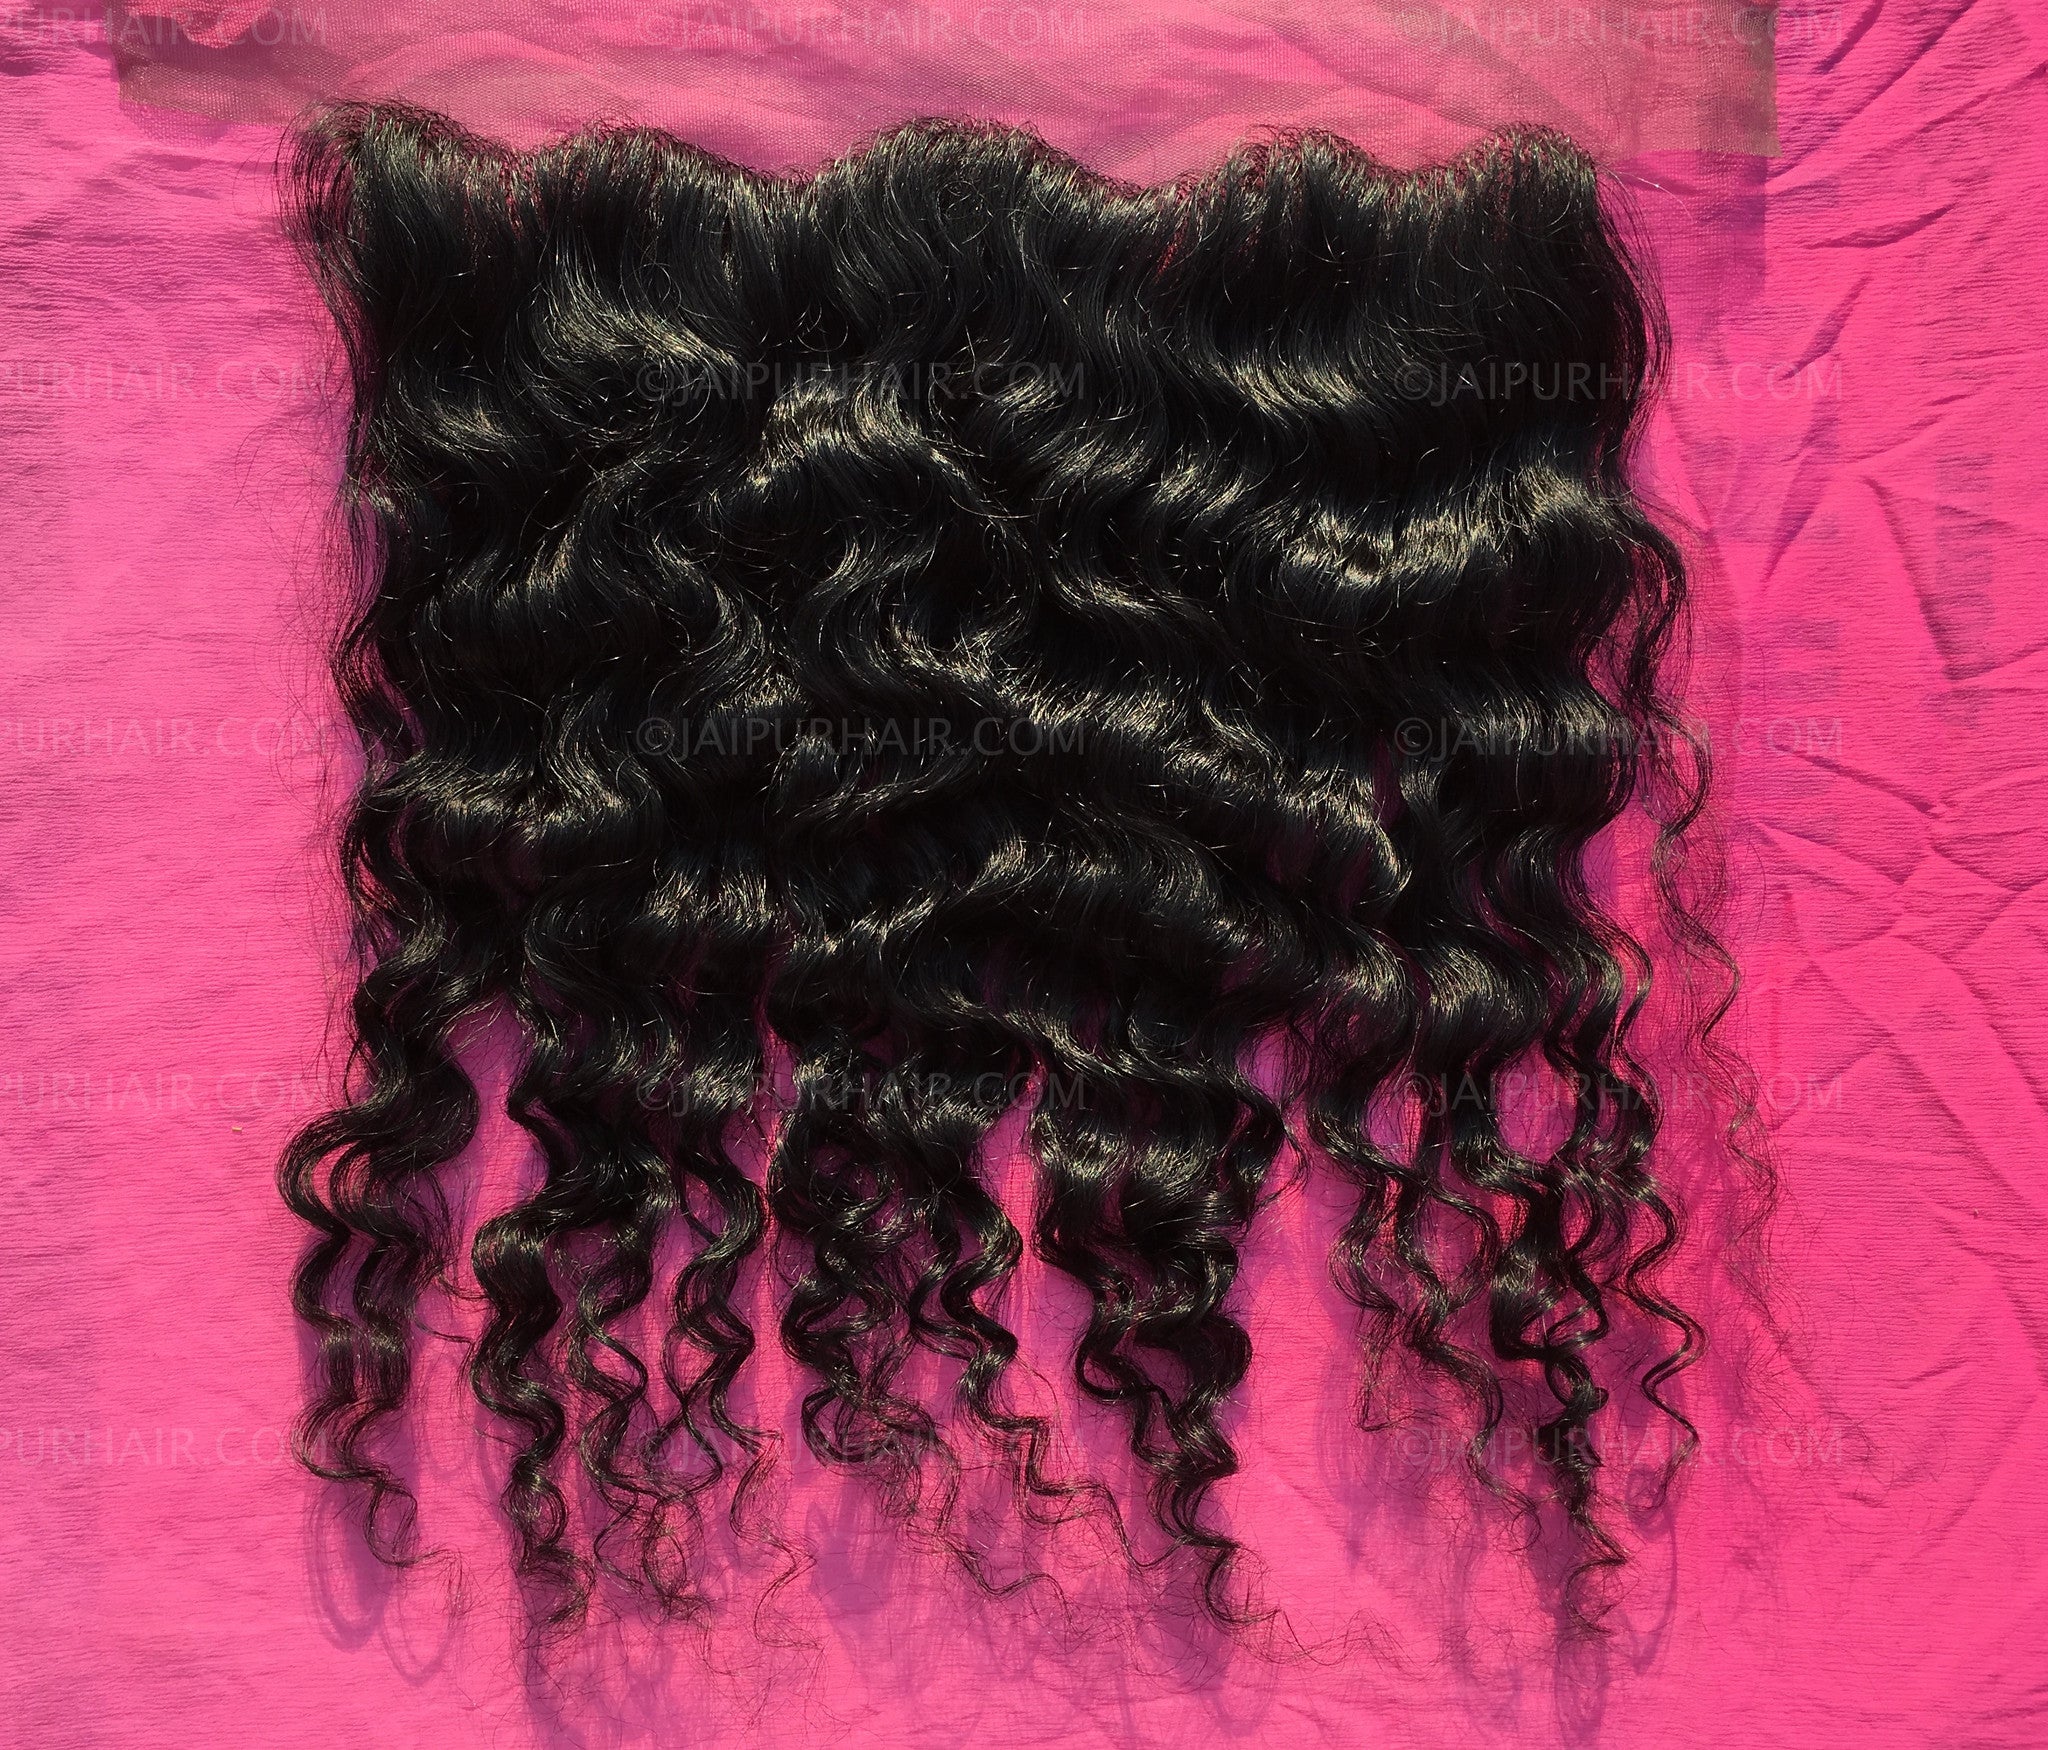 wholesale raw indian hair from india indian hair wholesale suppliers raw indian temple hair wholesale raw indian hair suppliers raw indian hair wholesale raw indian hair wholesale vendors indian hair vendors in india raw indian curly hair wholesale